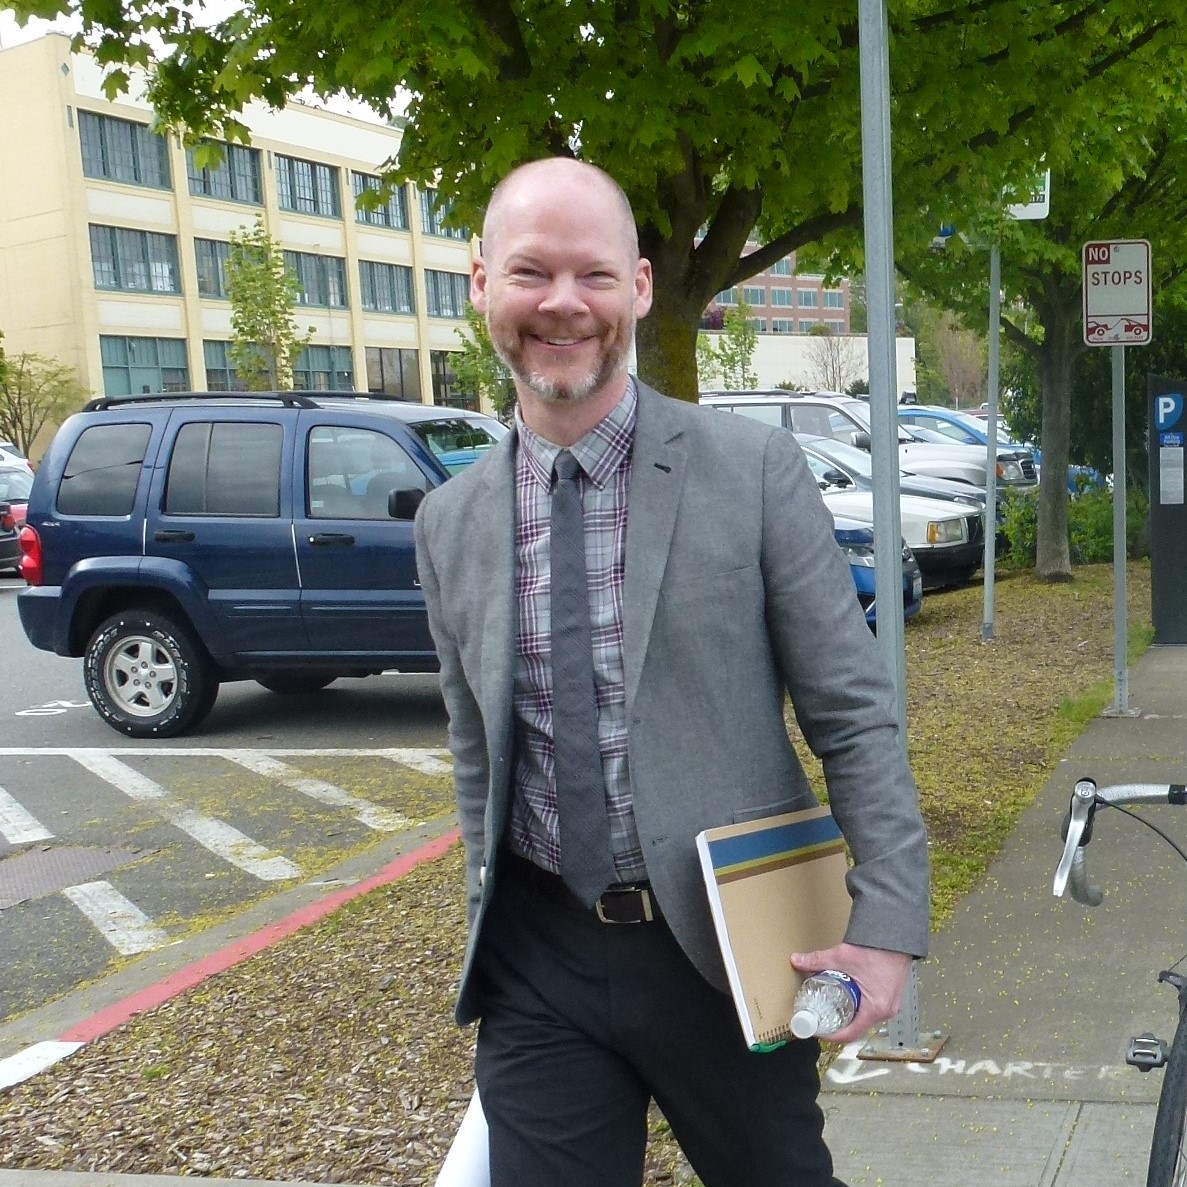 Kenneth Loen walks toward a public meeting with plans for a project in hand